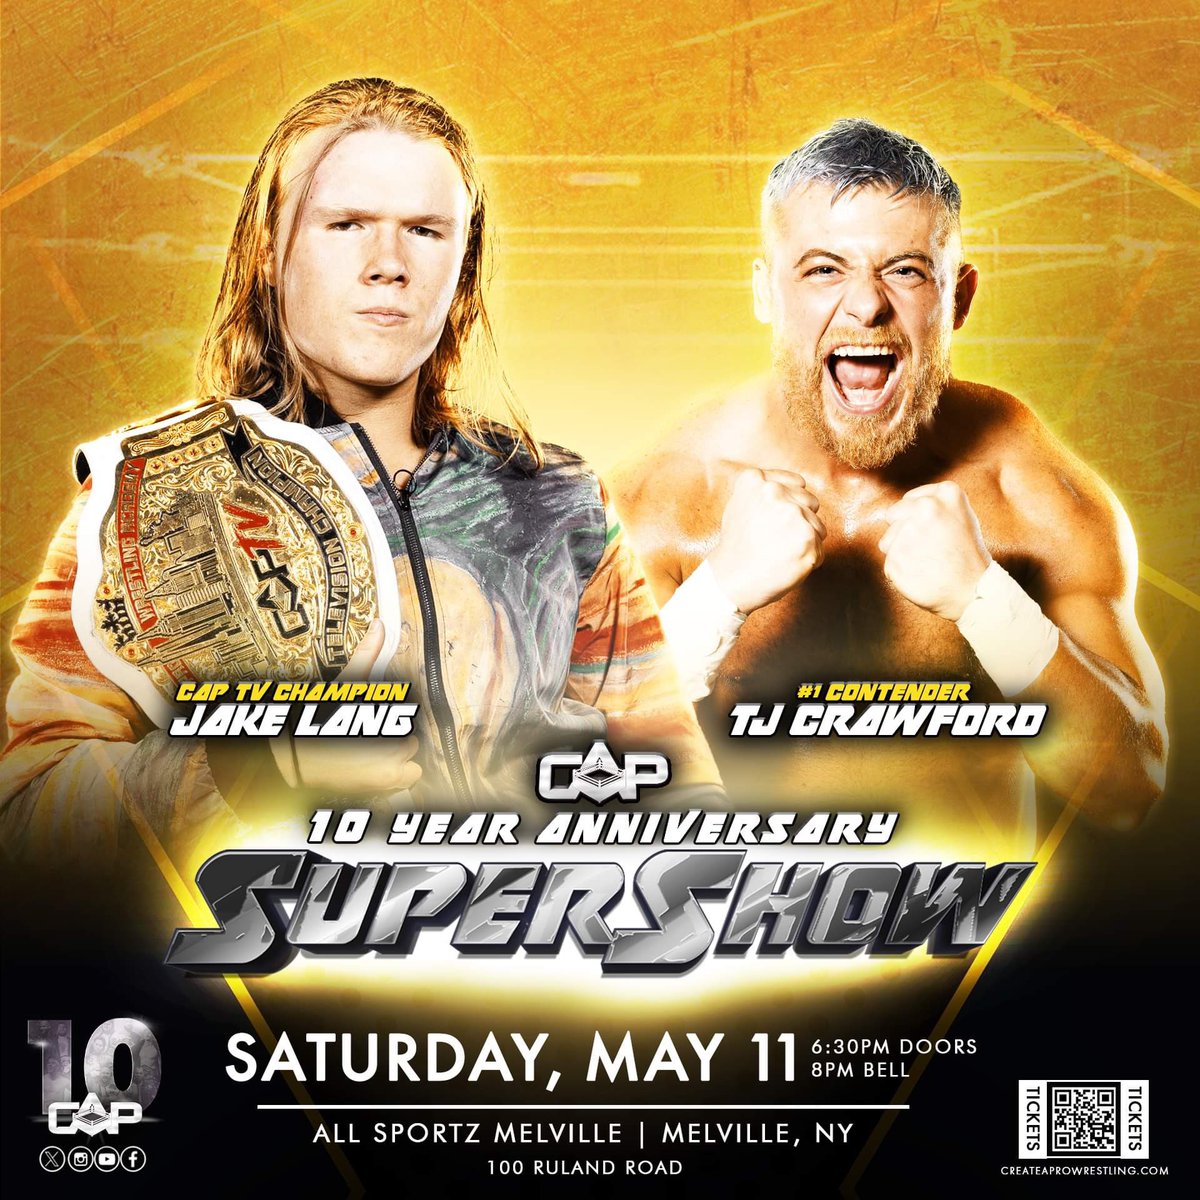 🚨MATCH ANNOUNCEMENT🚨 It’s official! “The Artist” Jake Lang defends his CAP TV Championship against TJ Crawford on 5/11 at the CAP 10 Year Anniversary Super Show! Will we see a new champion crowned? #CAP10 🎟GET YOUR TICKETS NOW🎟 eventbrite.com/e/create-a-pro…